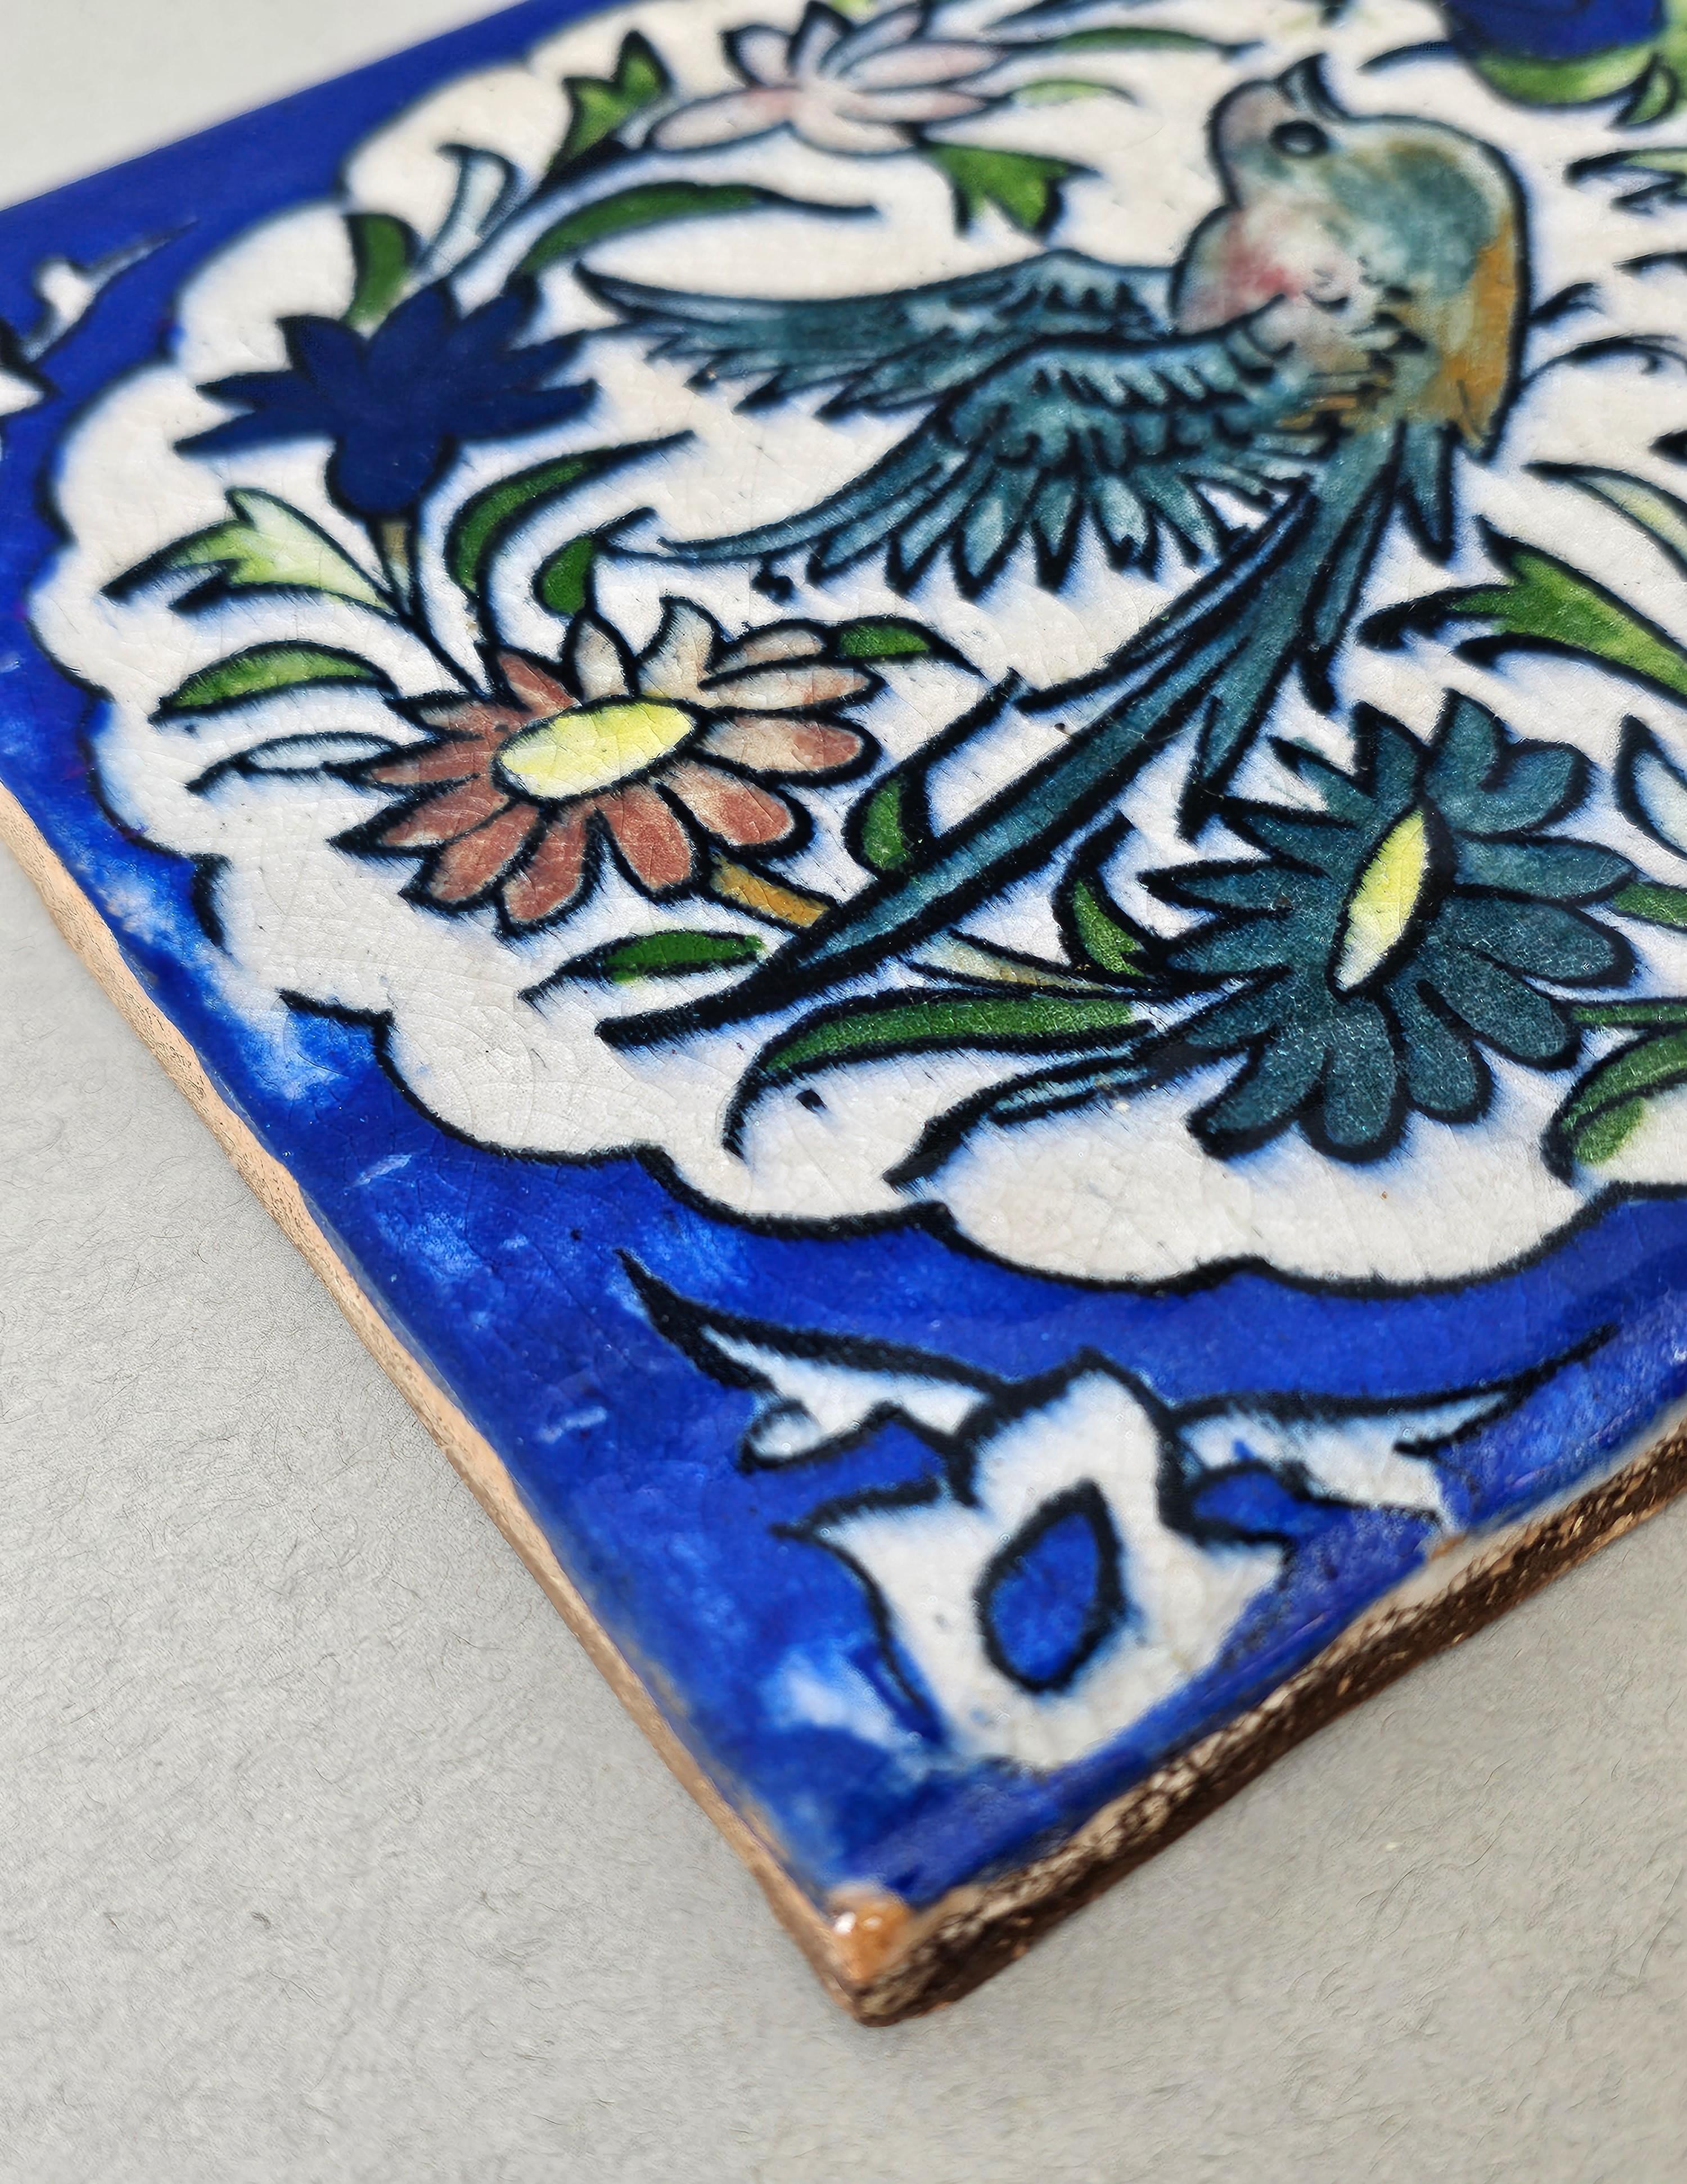 19th Century Persian Hand Painted Ceramic Wall Tile  For Sale 1